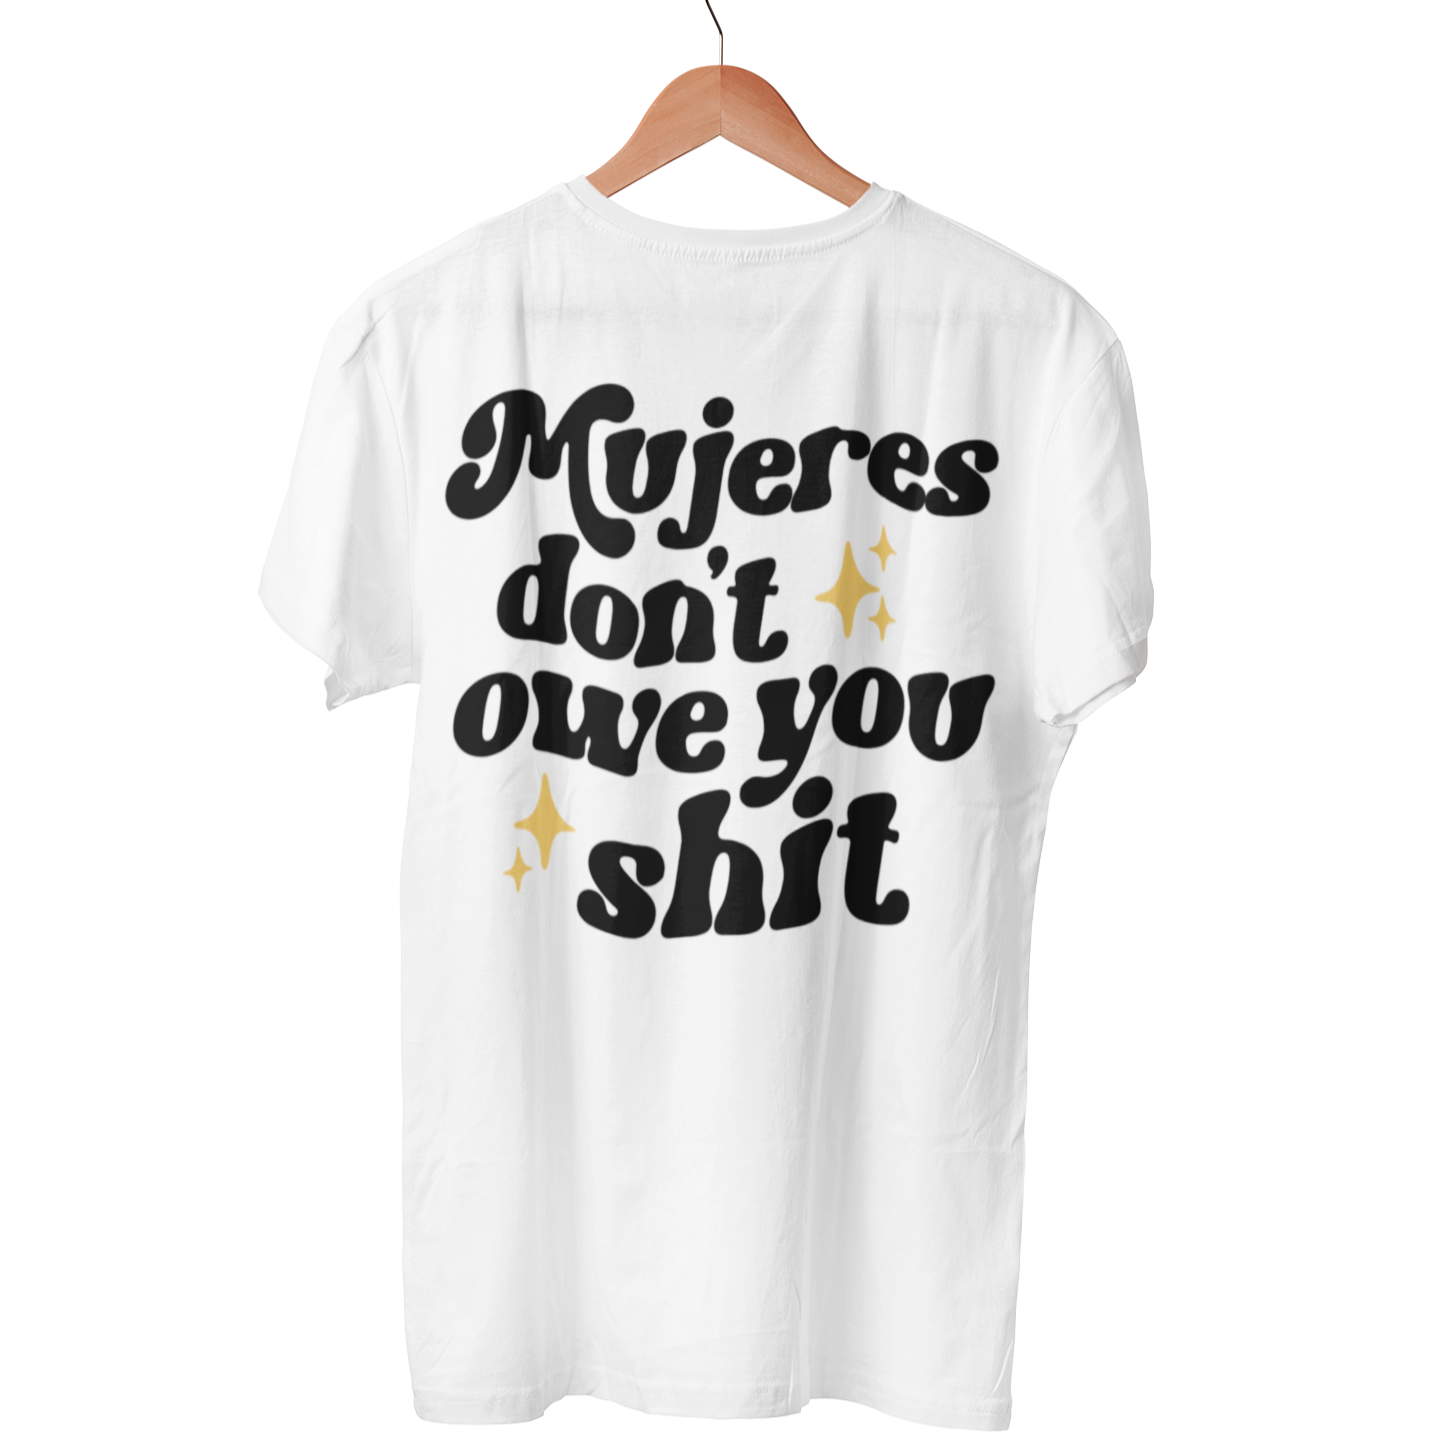 Empowering and funny white t-shirt for Latina women and Spanish-speakers.  the printing on the back of the t-shirt states "Mujeres don't owe you shit" in bold black writing